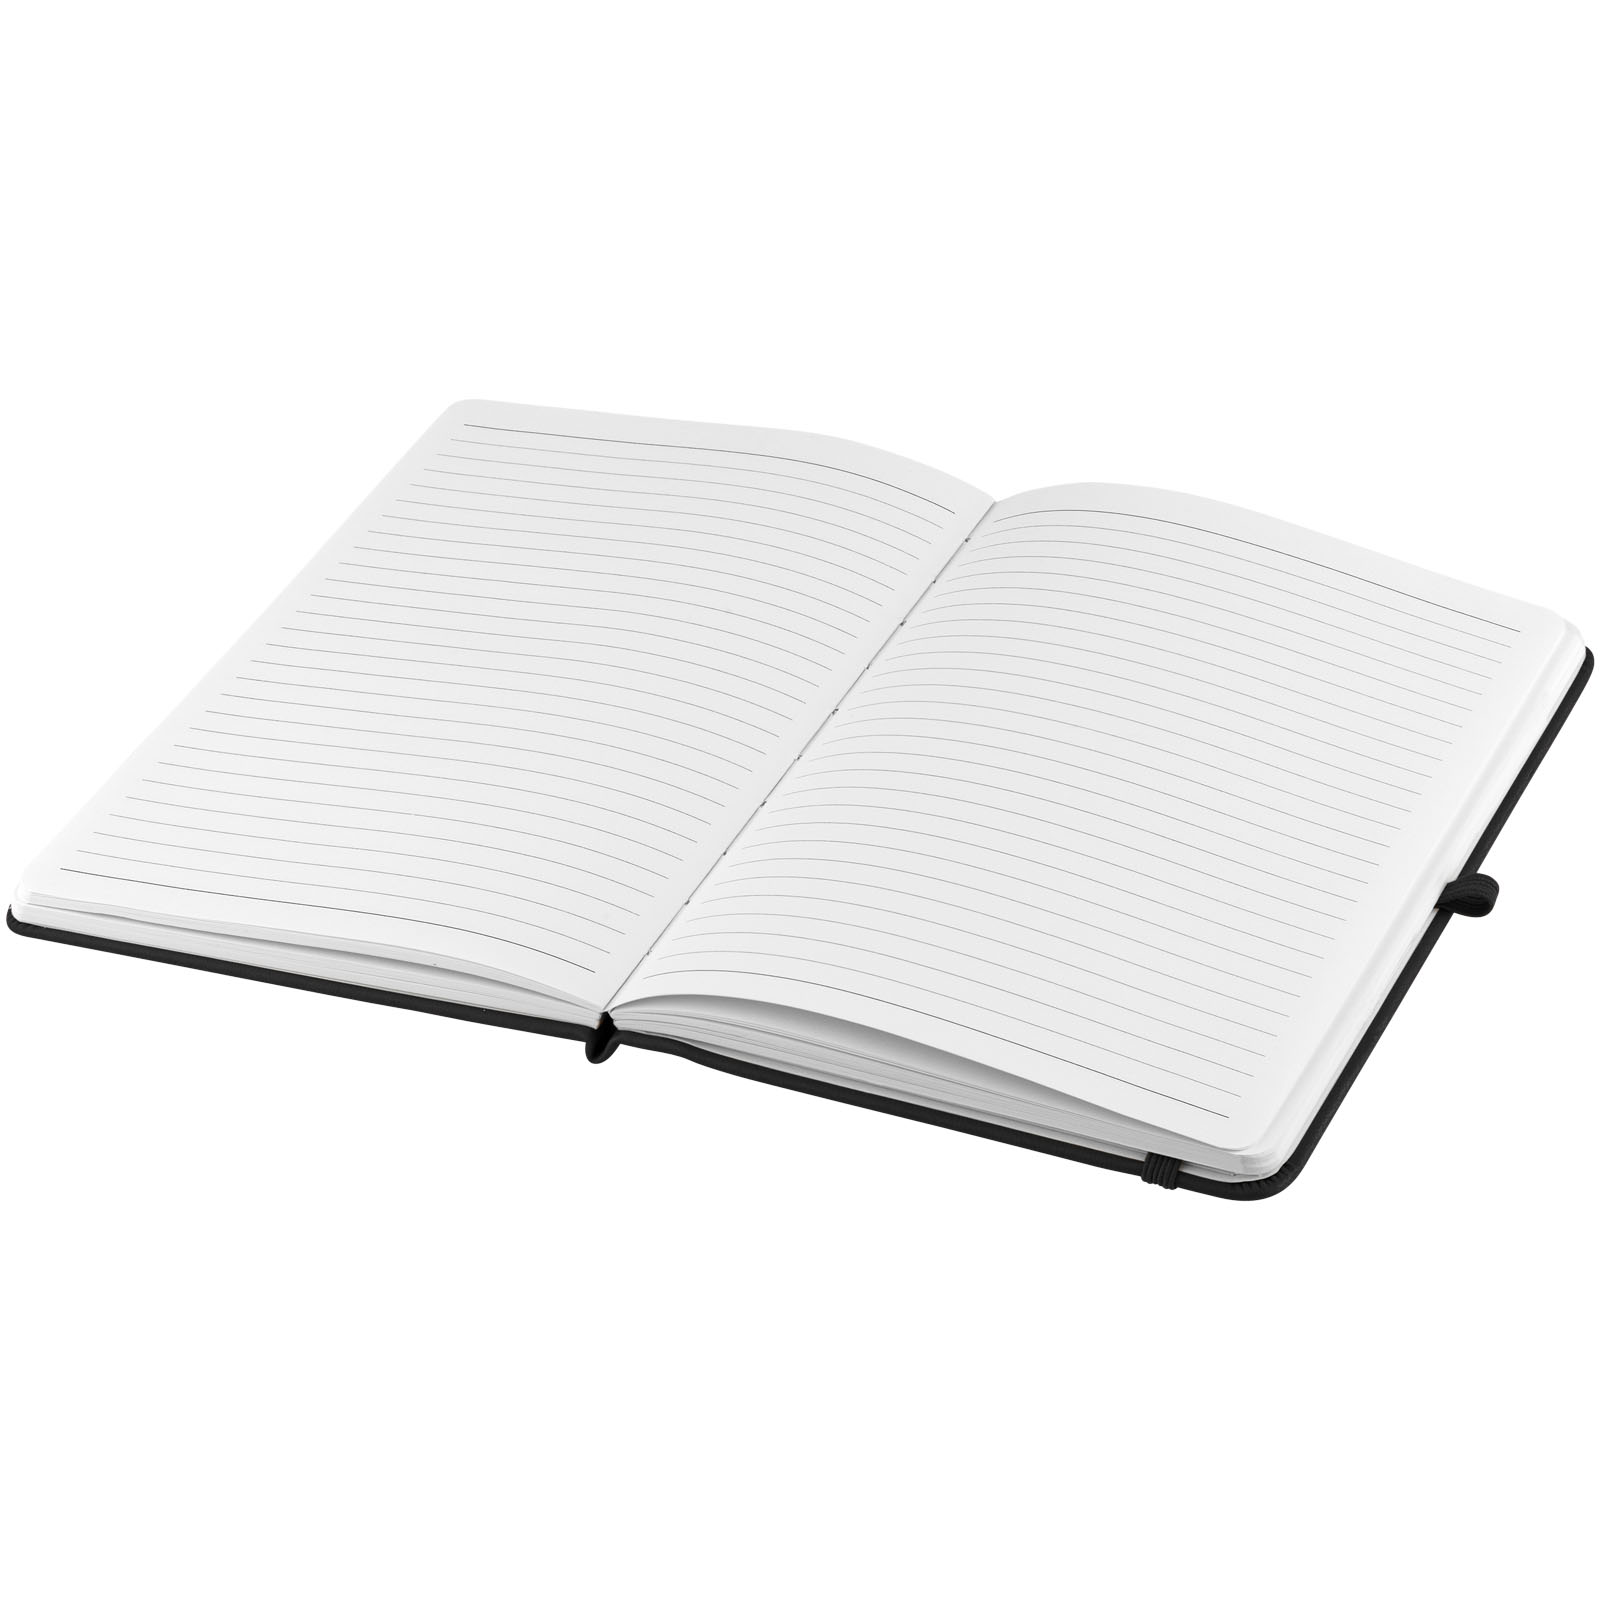 Advertising Hard cover notebooks - Theta A5 hard cover notebook - 4